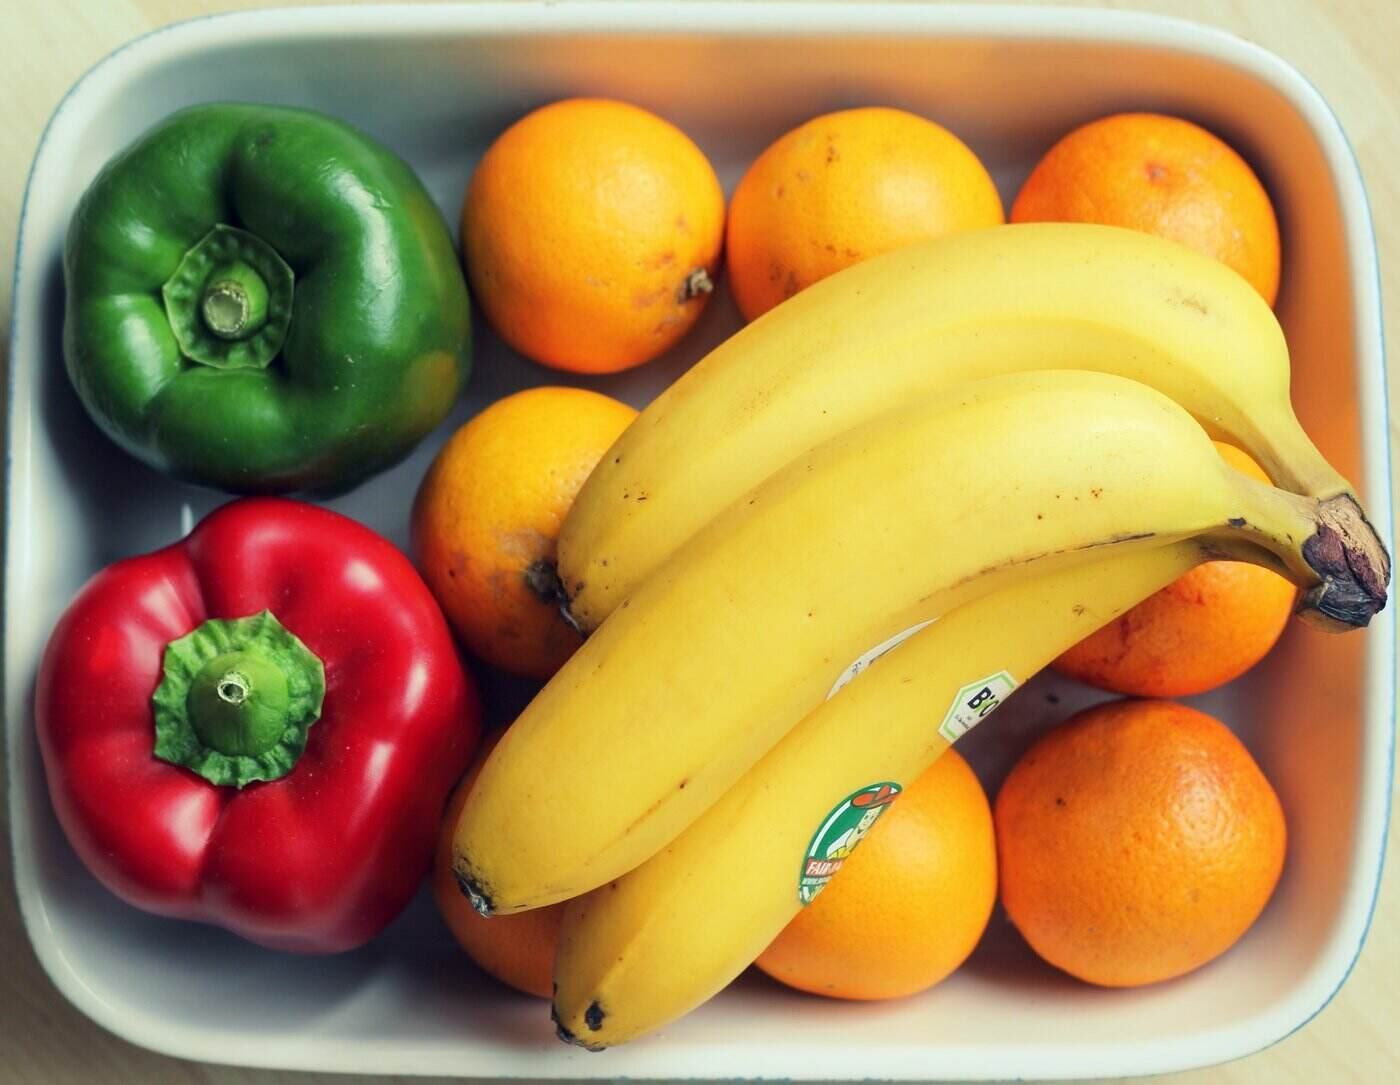 bananas oranges and peppers in dish - 5 ways reducing food waste can help save the environment